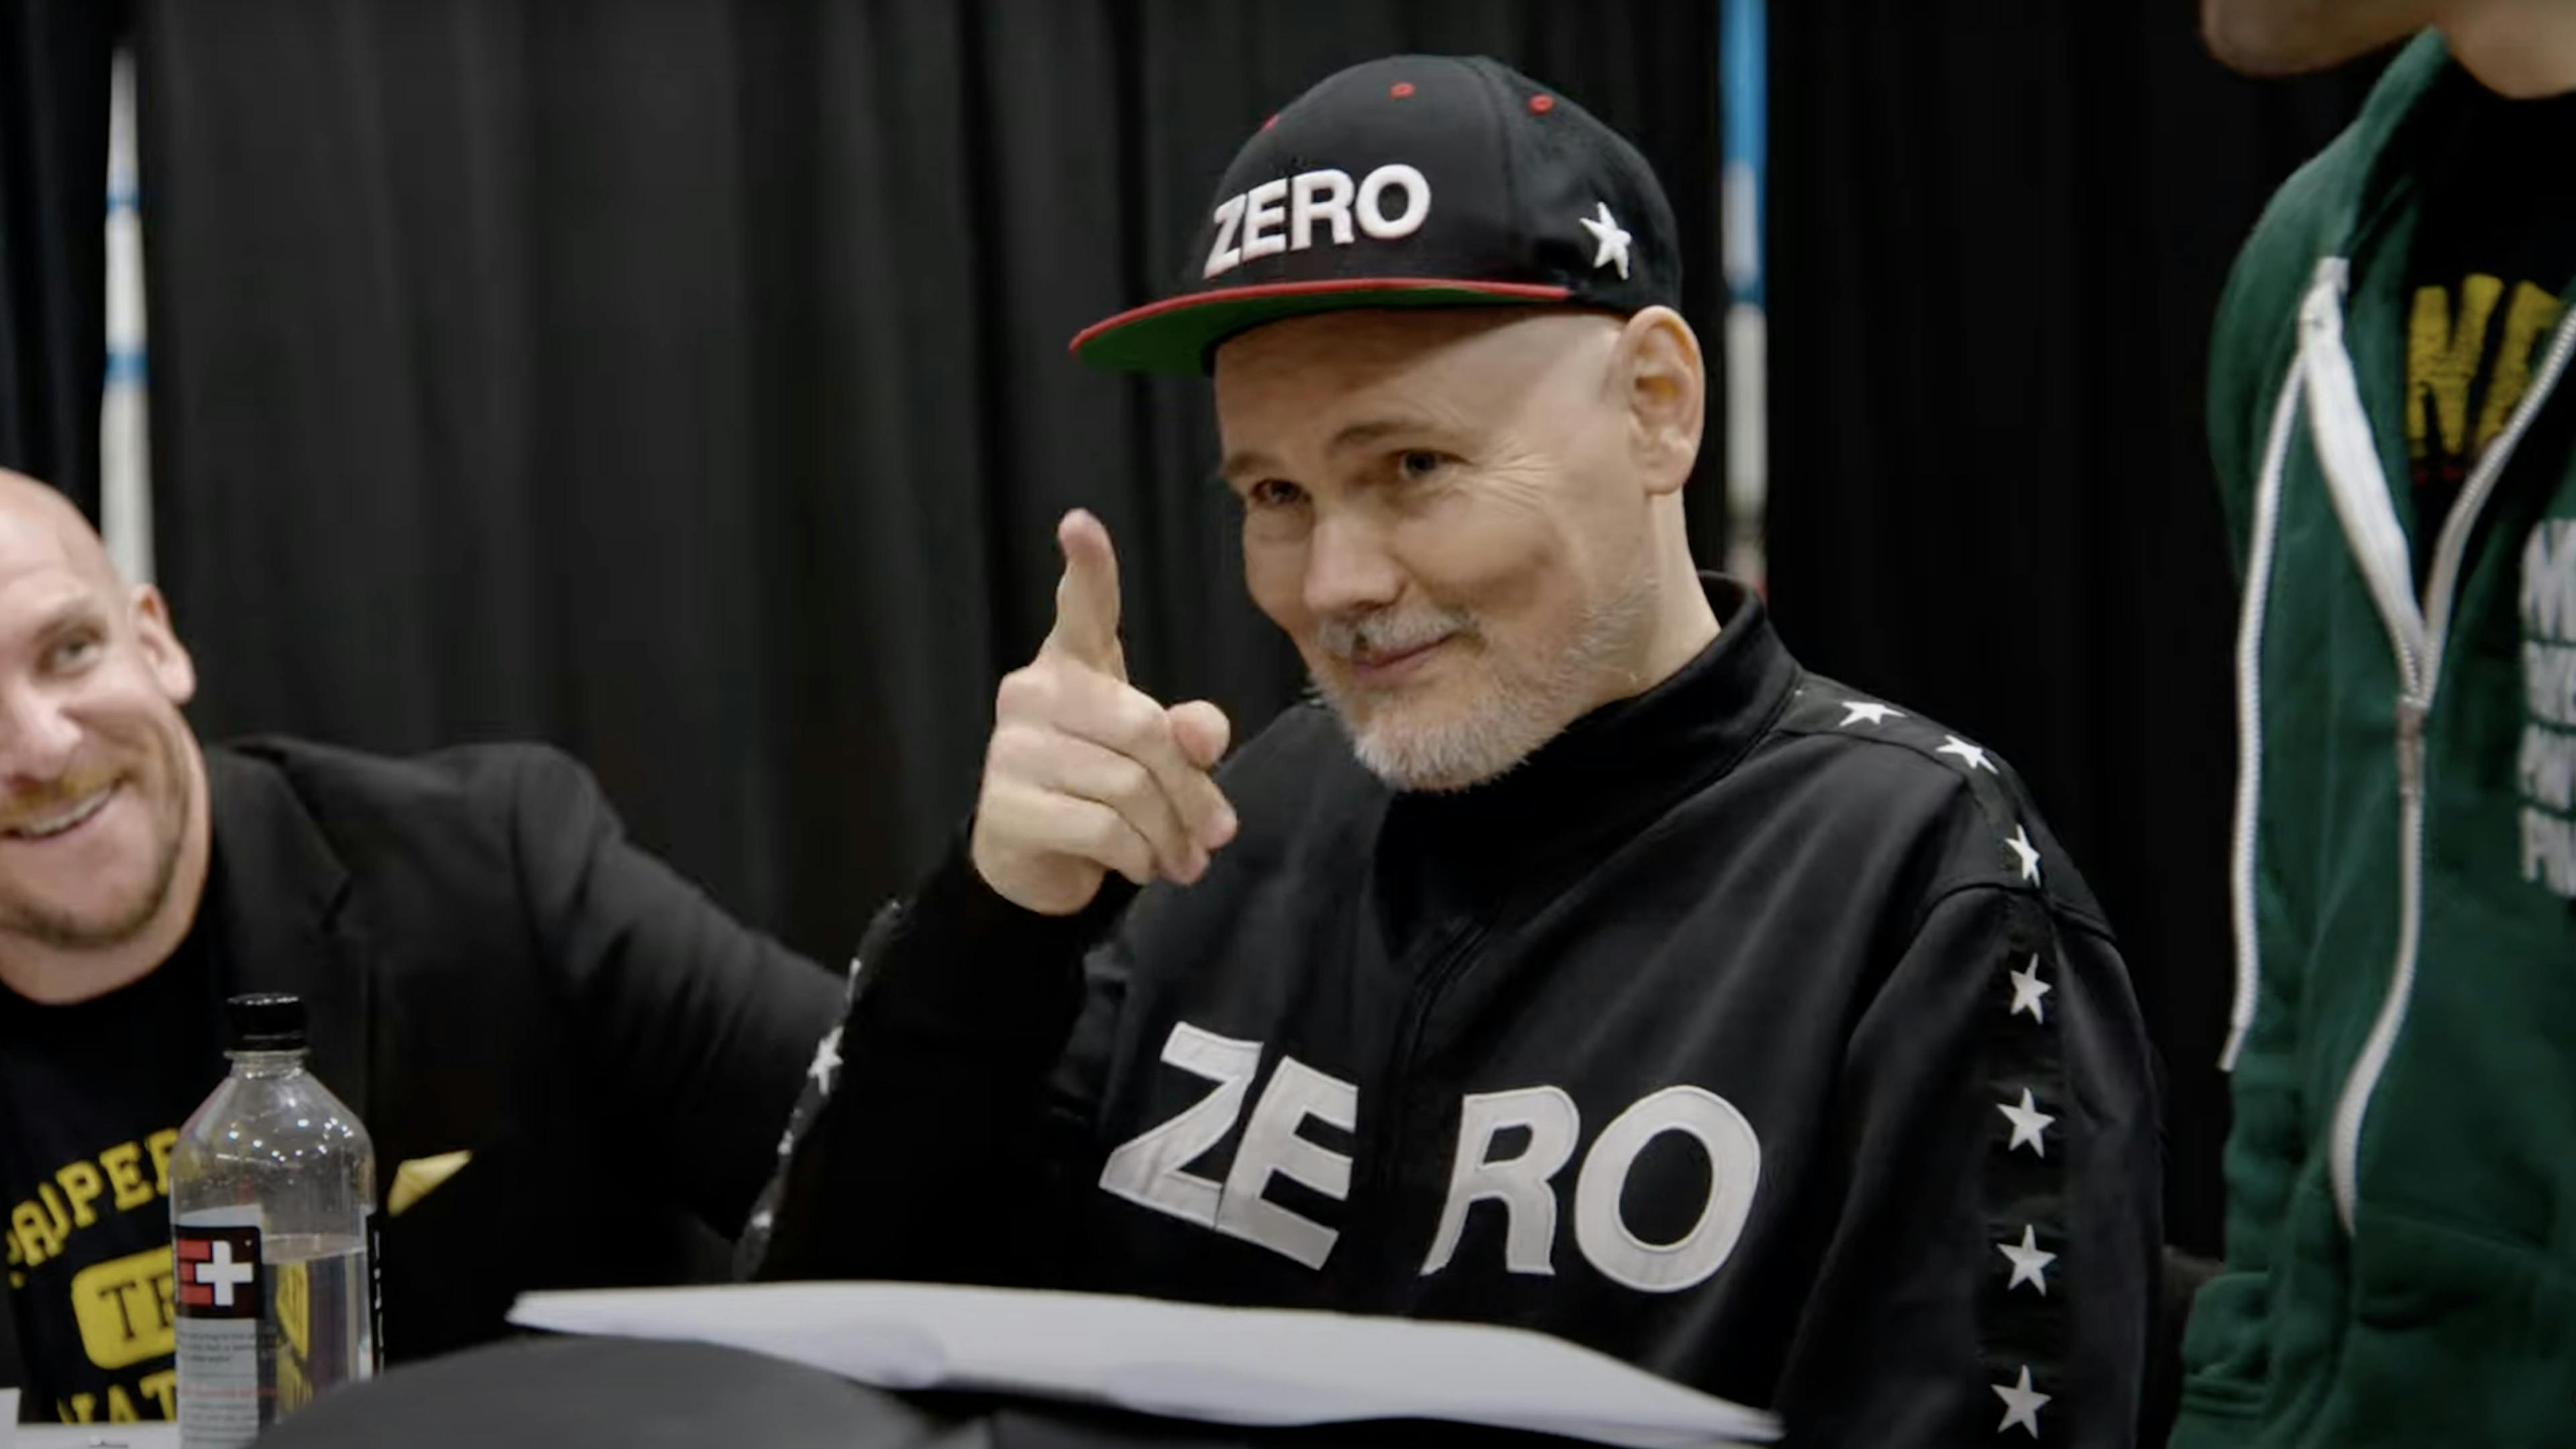 Billy Corgan reveals his work as a wrestling promoter in first trailer for his new TV series